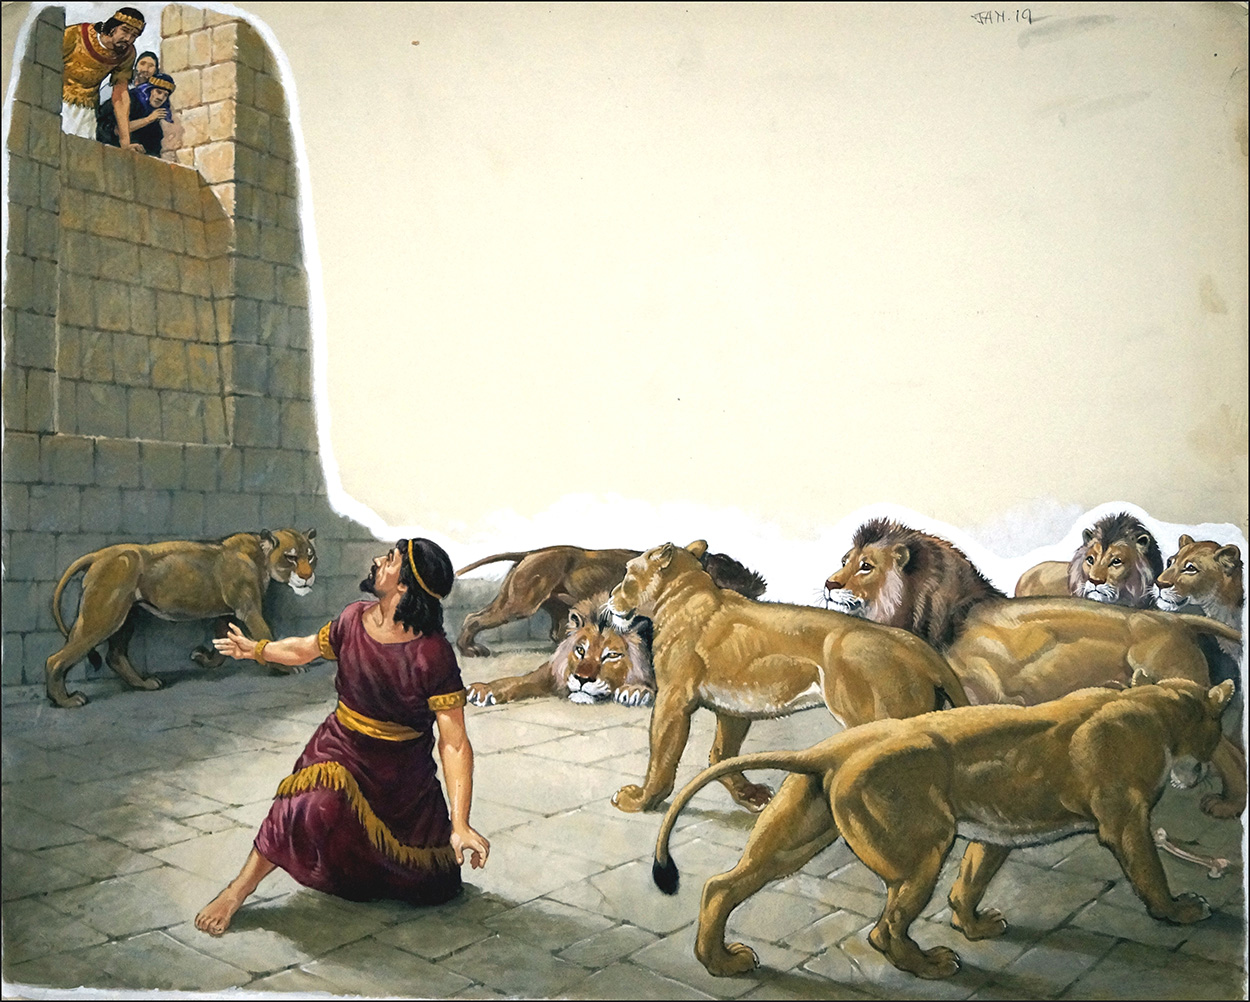 Daniel in the Lion's Den (Original) art by The Bible (Uptton) at The Illustration Art Gallery